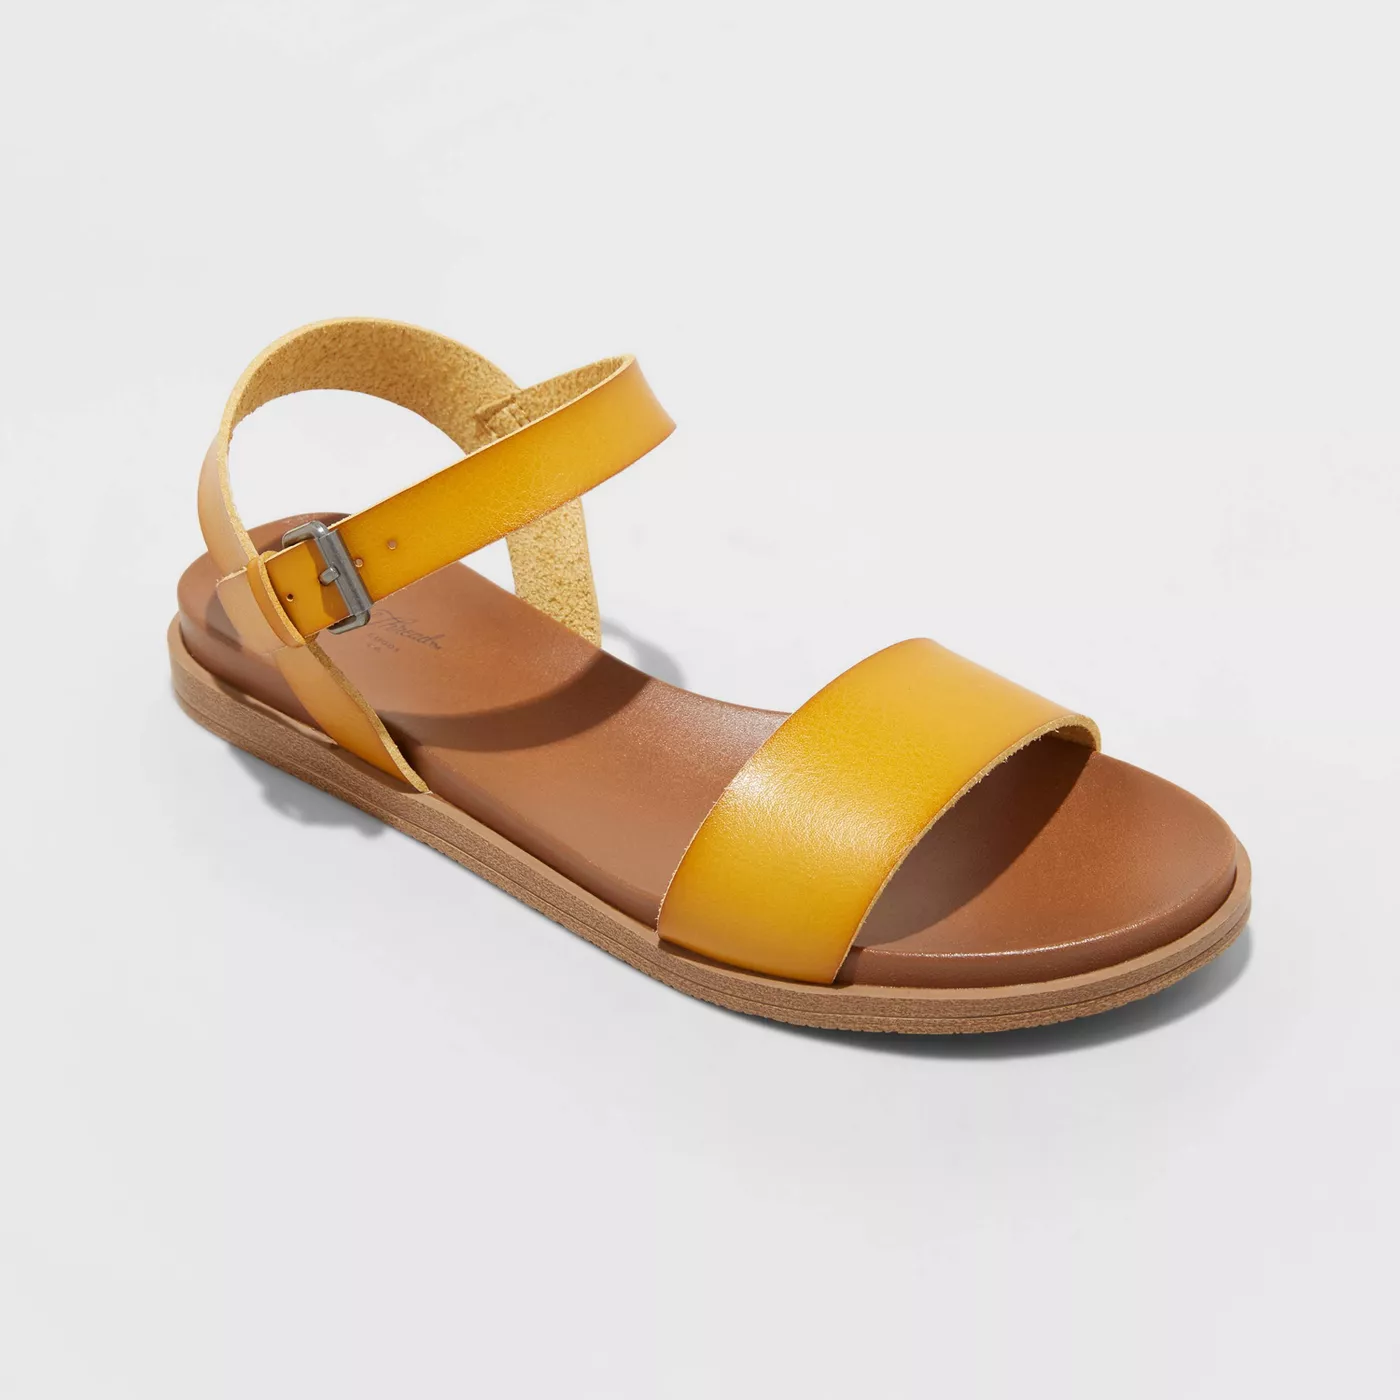 Women's Nyla Ankle Strap Sandals - Universal Thread™ - image 1 of 10